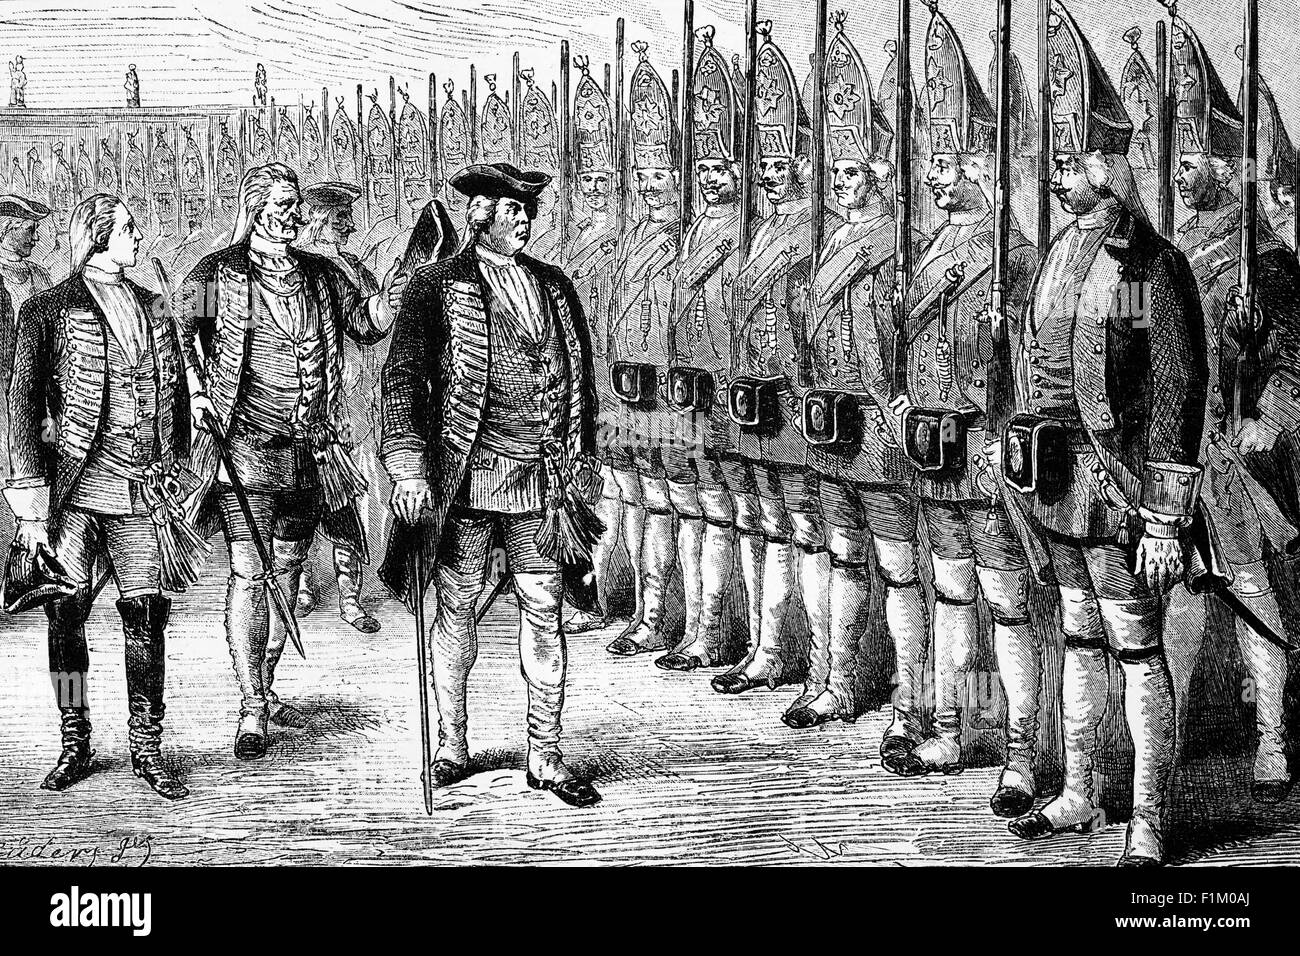 King Frederick William I of Prussia Inspecting his Giant Guards, known as the Grand Grenadiers of Potsdam, although most called them the Potsdam Grenadiers or Potsdam Giants. The original required height was 6 Prussian feet (about 6'2' or 1.88 meters). One of the tallest soldiers, the Irishman James Kirkland, was reportedly 2.17 meters (about 7 feet)[2] in height. He gave bonuses to fathers of tall sons and landowners who gave up their tallest farm workers to join the regiment. If the man was not interested in joining the regiment, the king resorted to forced recruitment and kidnapping. Stock Photo